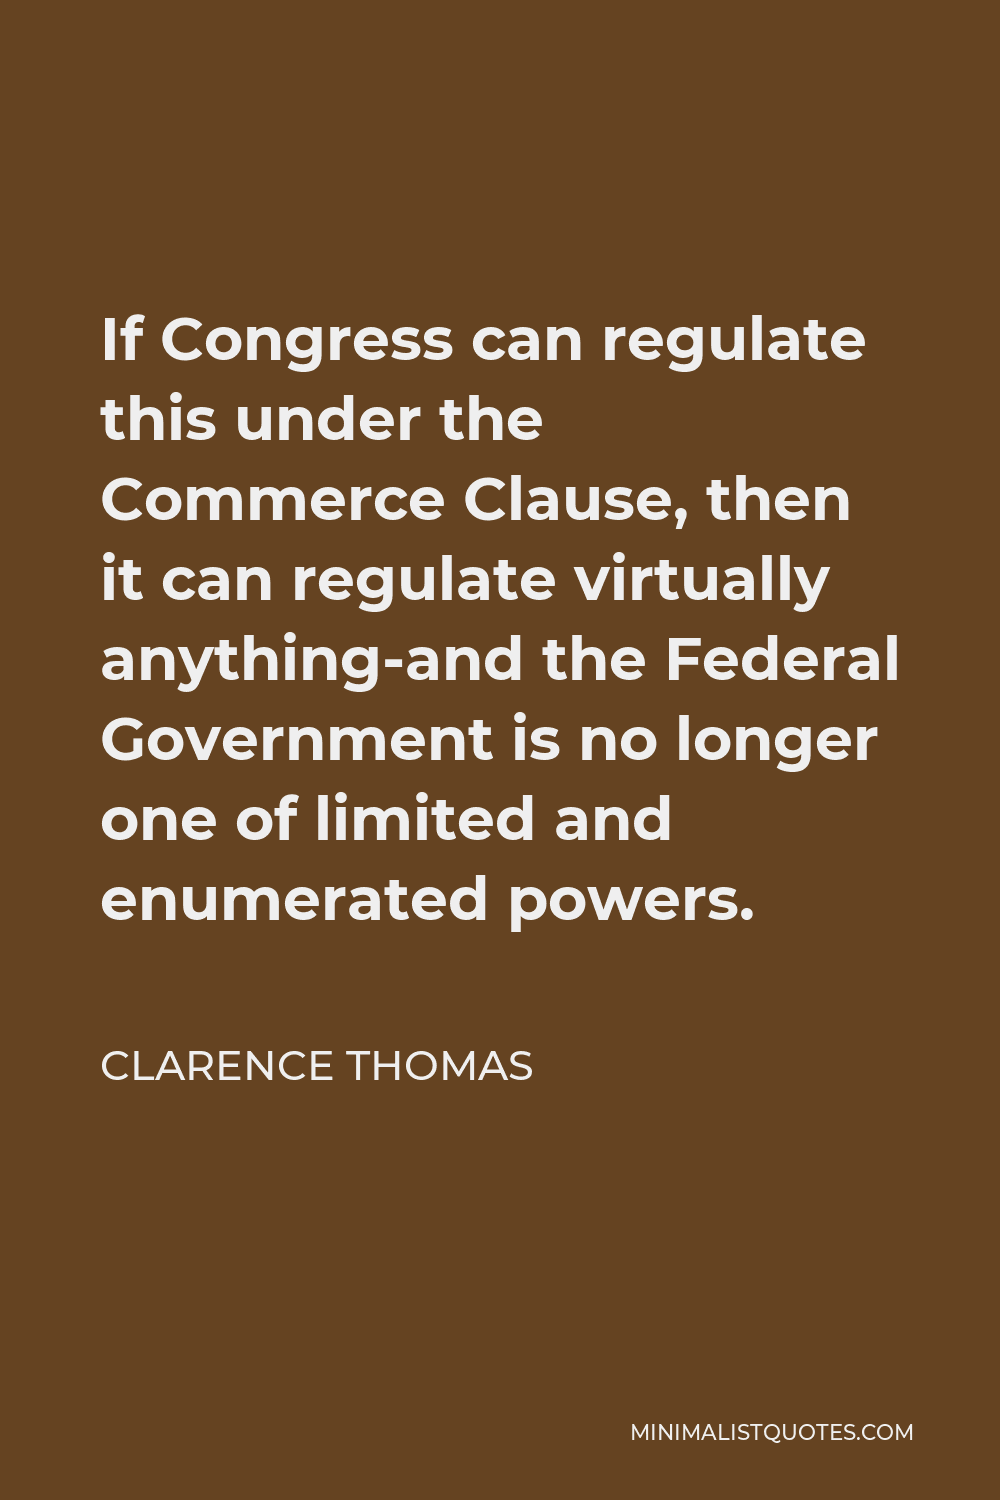 Clarence Thomas Quote - If Congress can regulate this under the Commerce Clause, then it can regulate virtually anything-and the Federal Government is no longer one of limited and enumerated powers.